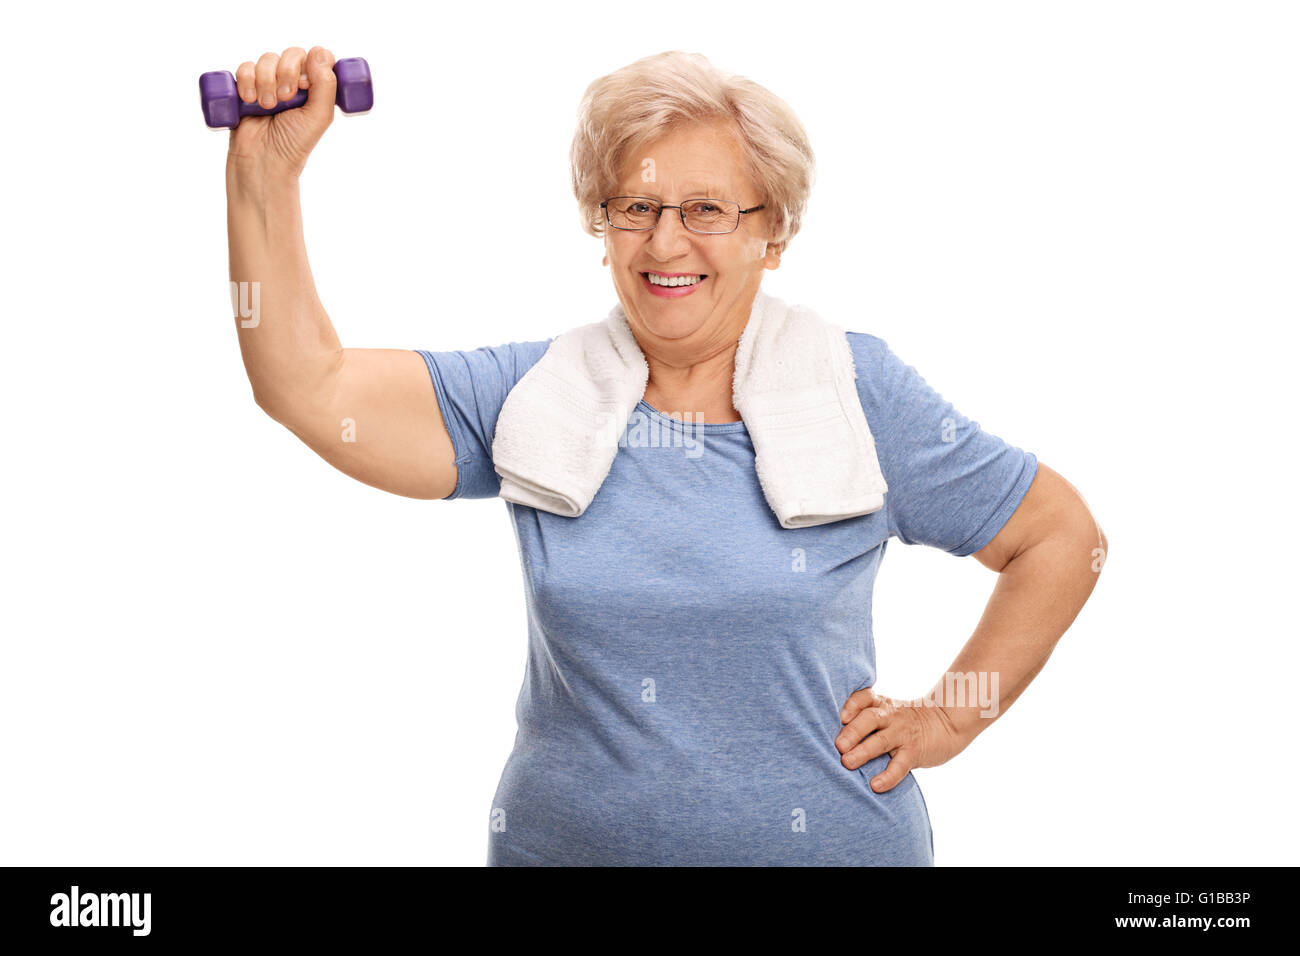 Mature lady exercising with a purple dumbbell and looking at the camera isolated on white background Stock Photo